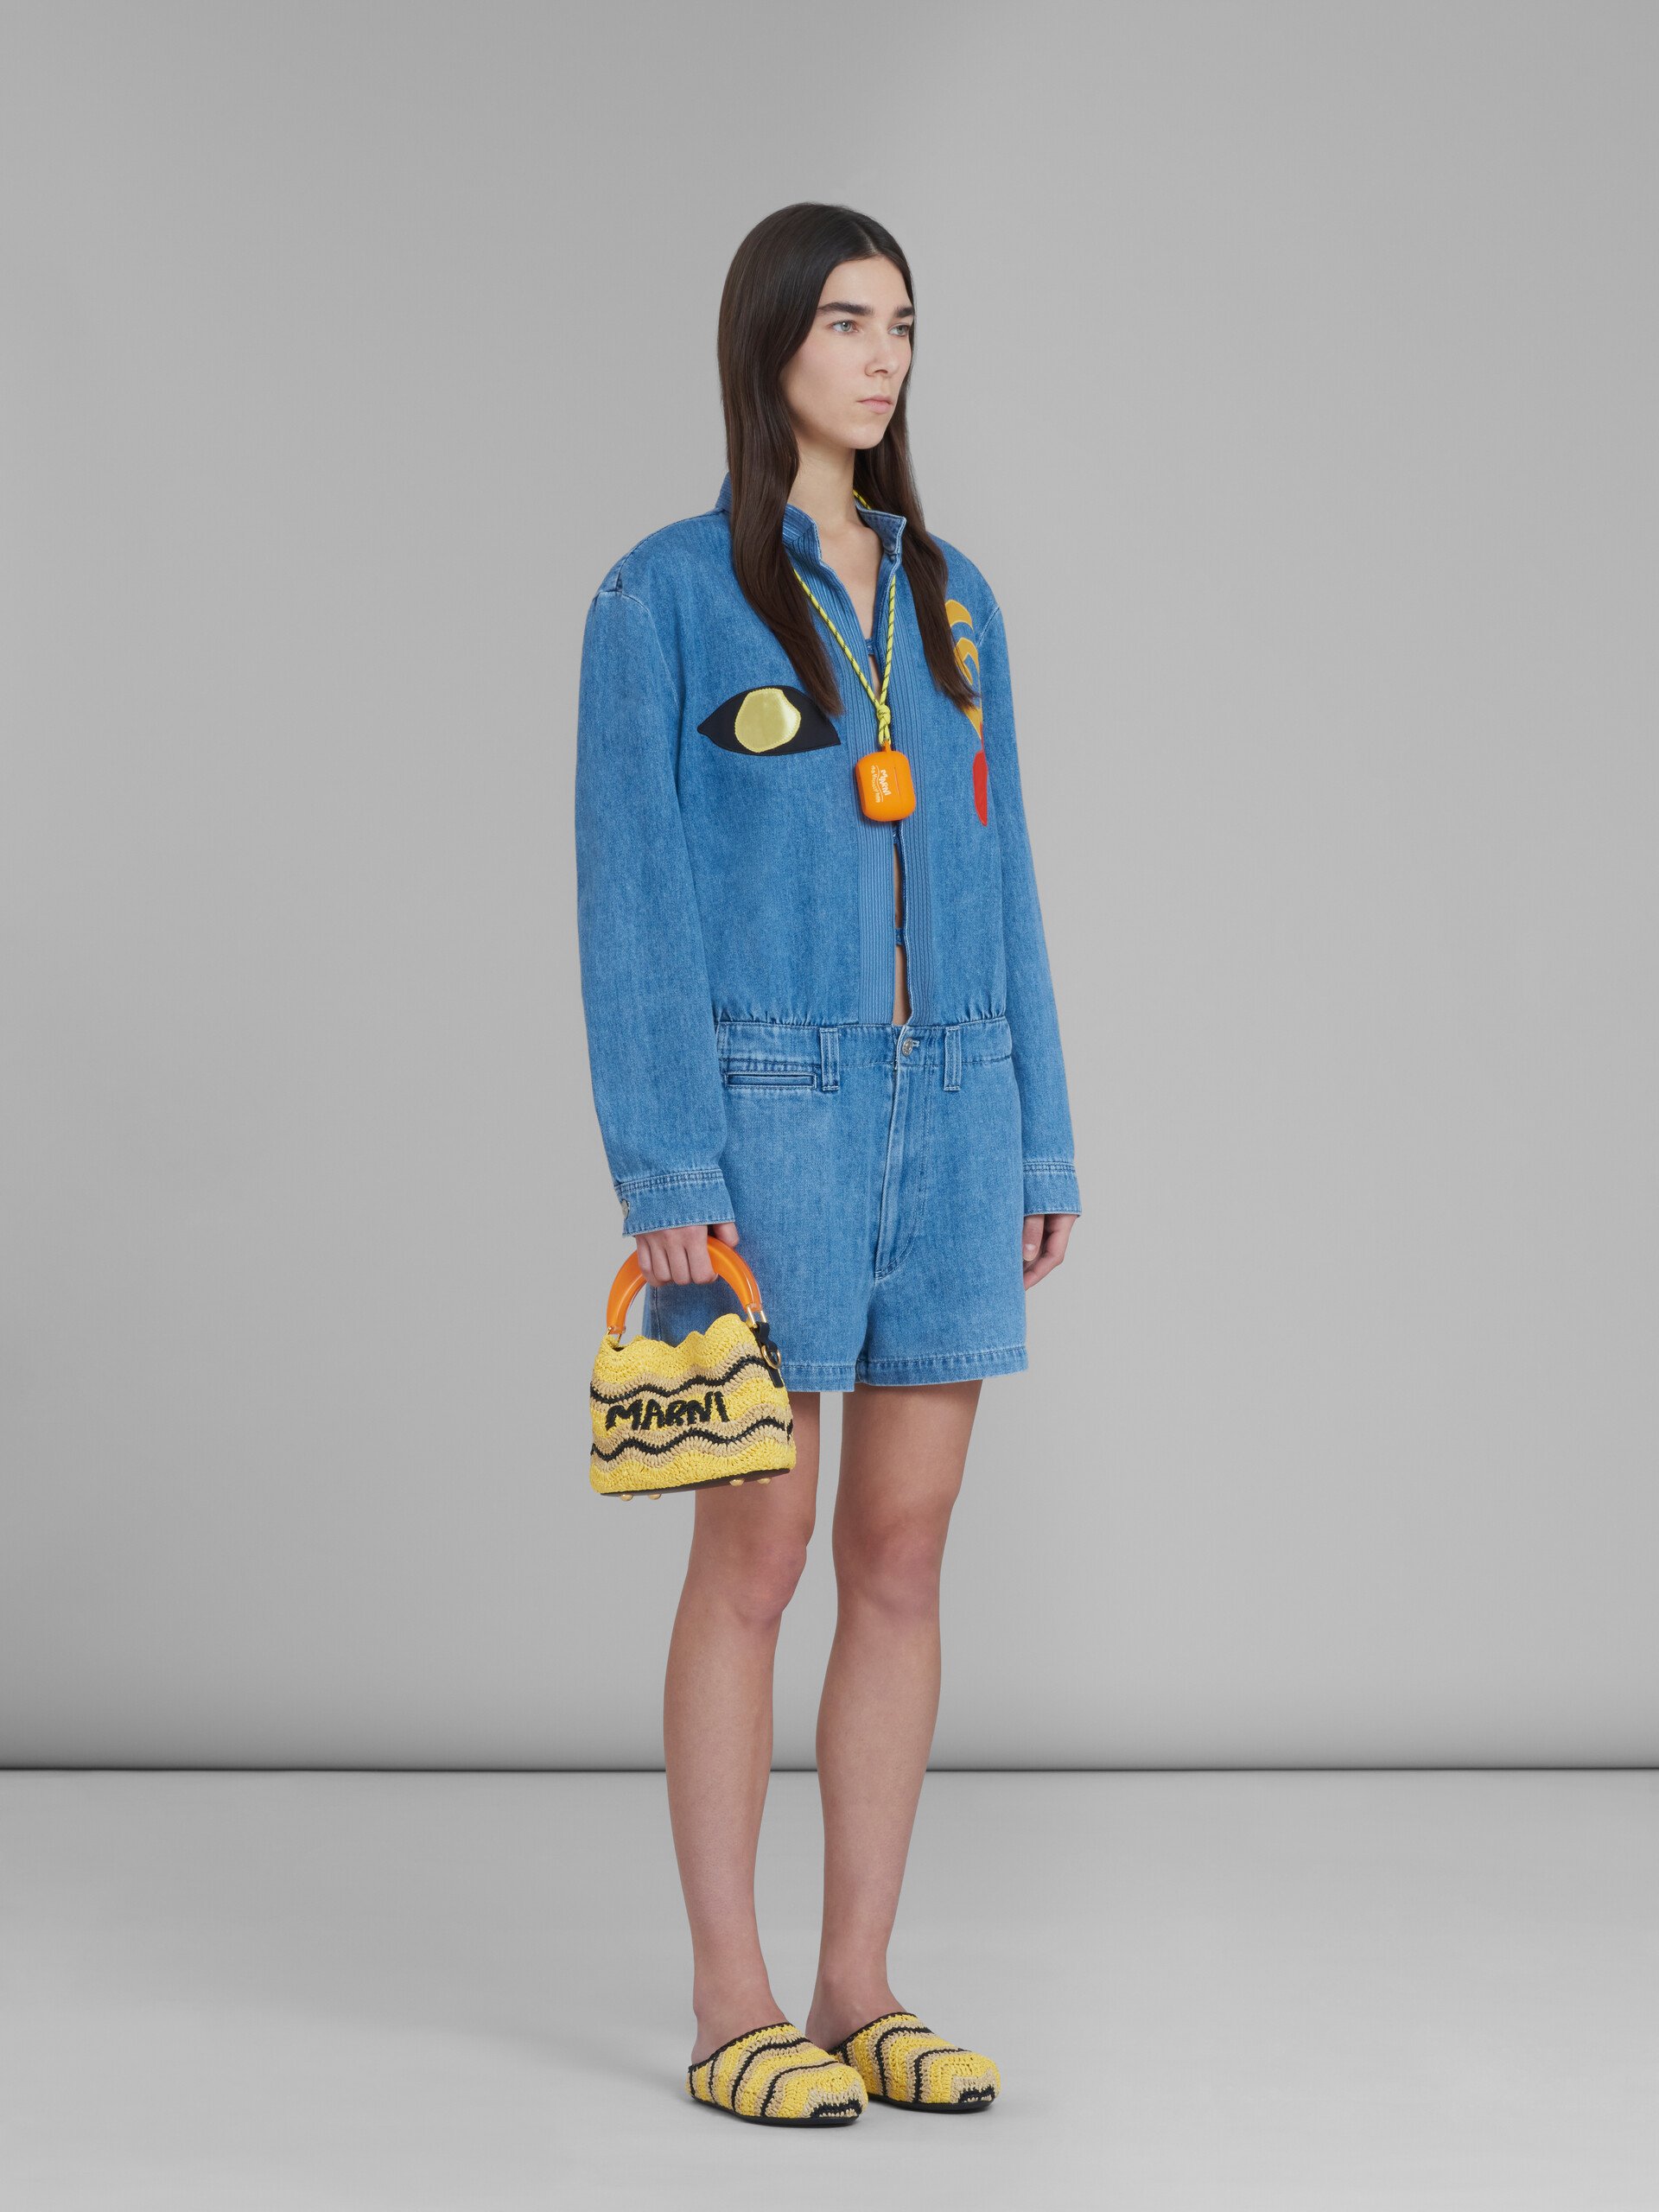 Marni x No Vacancy Inn - Blue chambray jumpsuit with embroidery - Overalls - Image 6